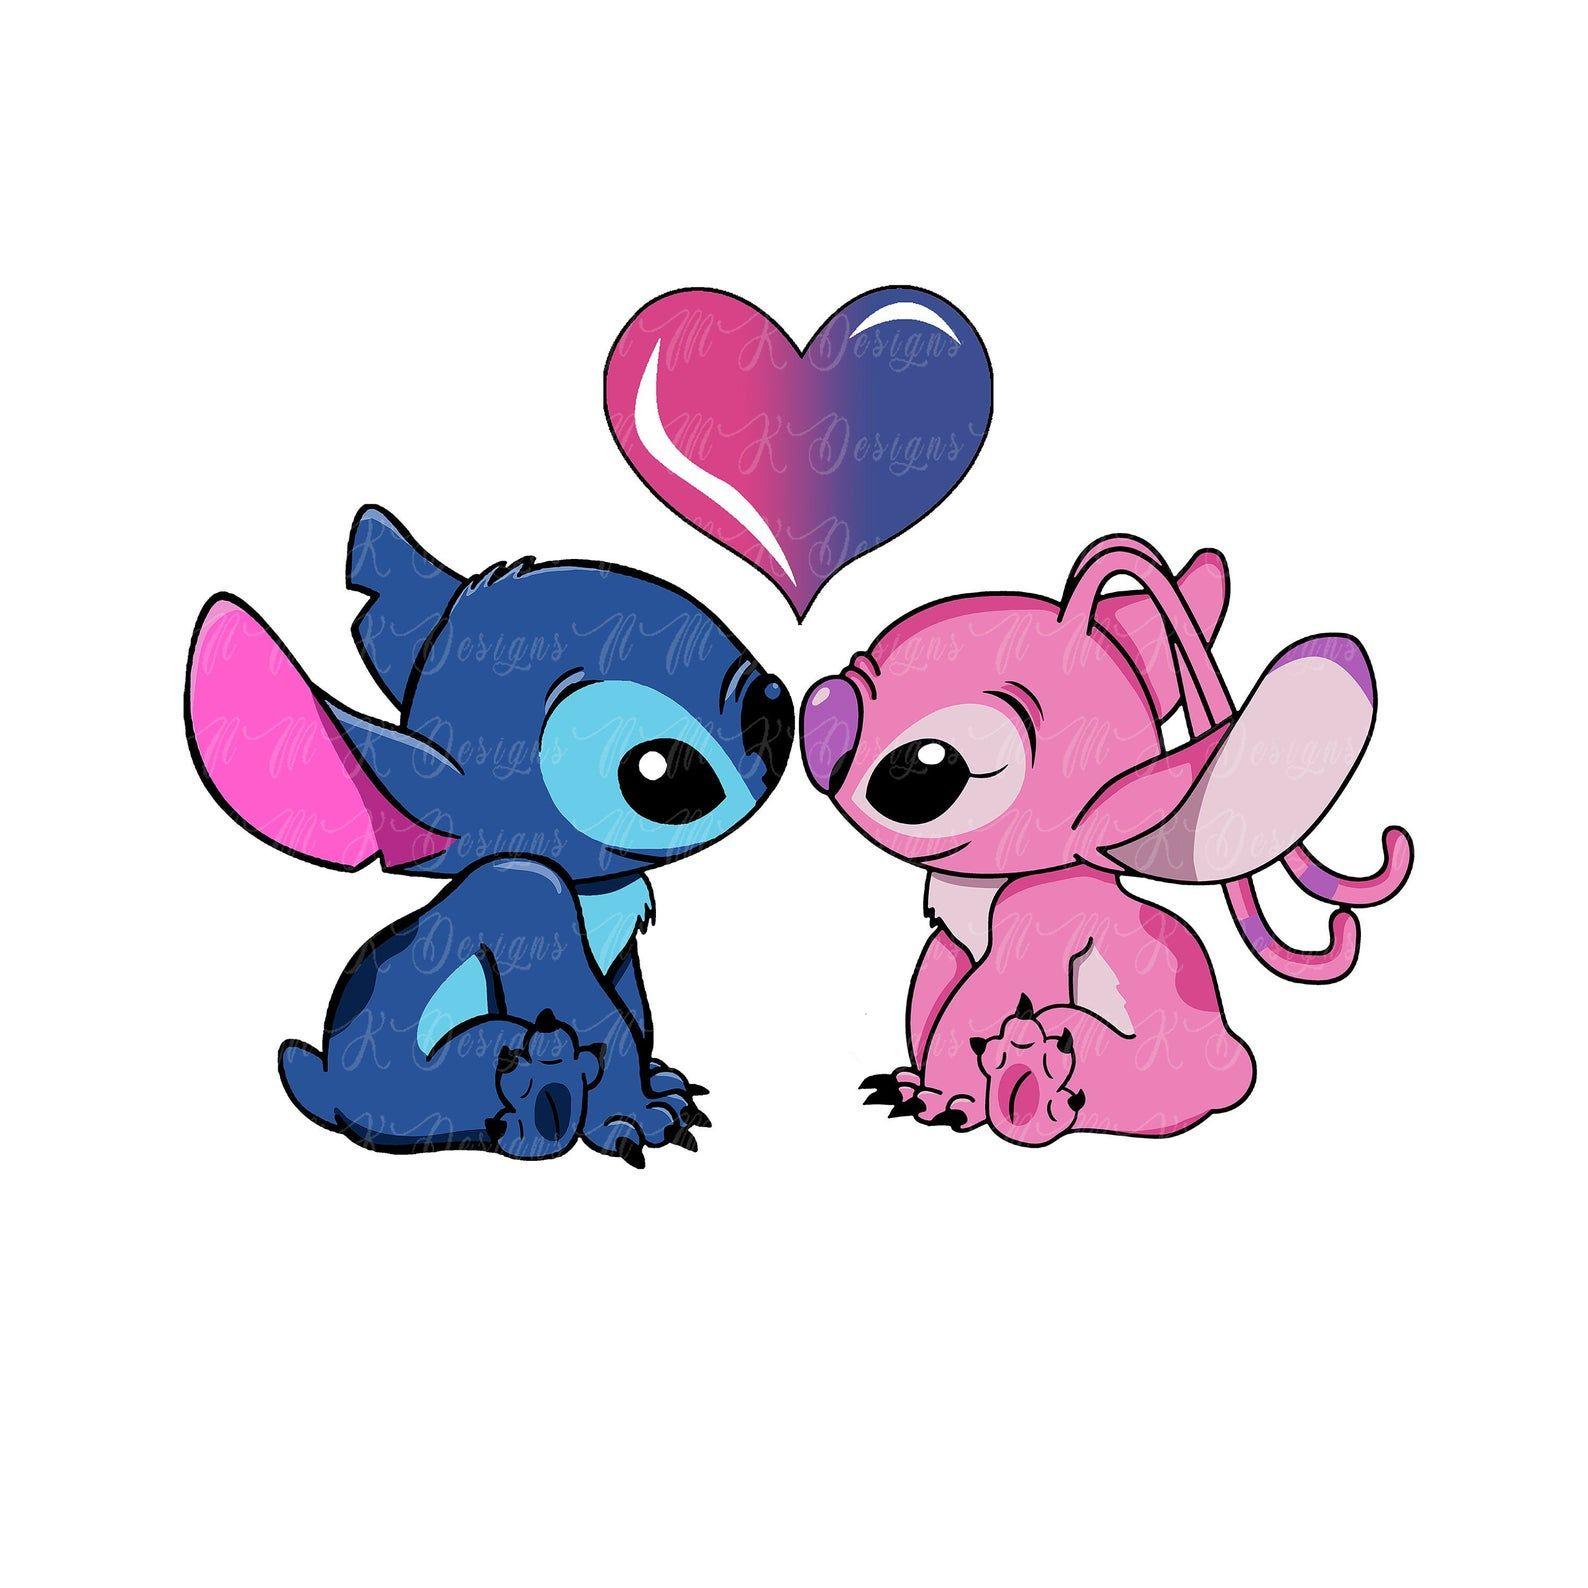 7 Stitch and Angel aesthetic ideas  stitch and angel lilo and stitch  drawings stitch drawing